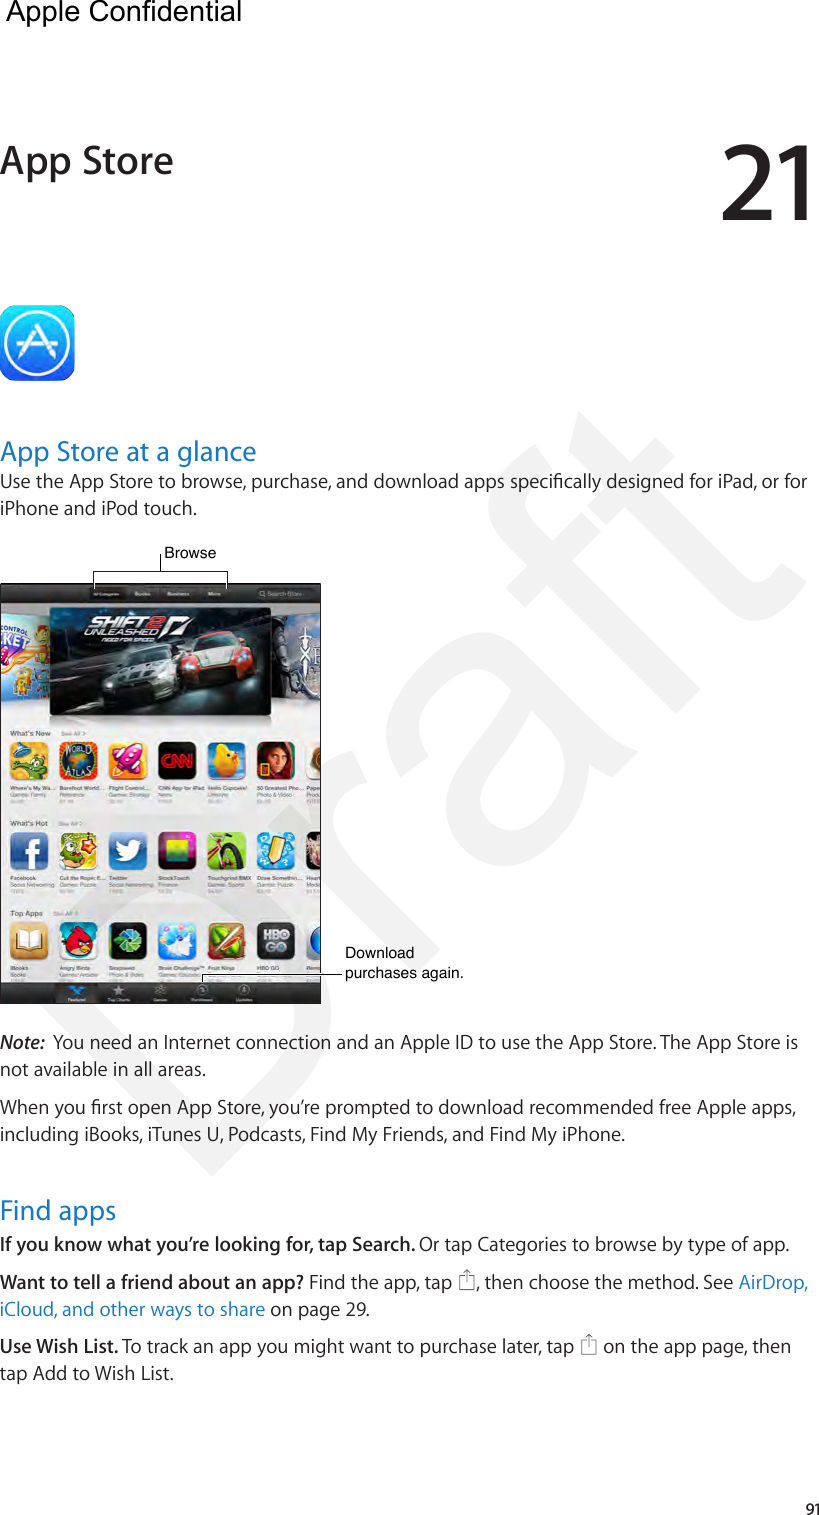 2191App Store at a glanceiPhone and iPod touch. Browse  Browse  Download purchases again.Download purchases again.Note:  You need an Internet connection and an Apple ID to use the App Store. The App Store is not available in all areas.including iBooks, iTunes U, Podcasts, Find My Friends, and Find My iPhone.Find appsIf you know what you’re looking for, tap Search. Or tap Categories to browse by type of app.Want to tell a friend about an app? Find the app, tap  , then choose the method. See AirDrop, iCloud, and other ways to share on page 29.Use Wish List. To track an app you might want to purchase later, tap   on the app page, then tap Add to Wish List. App Store  Apple Confidential Draft